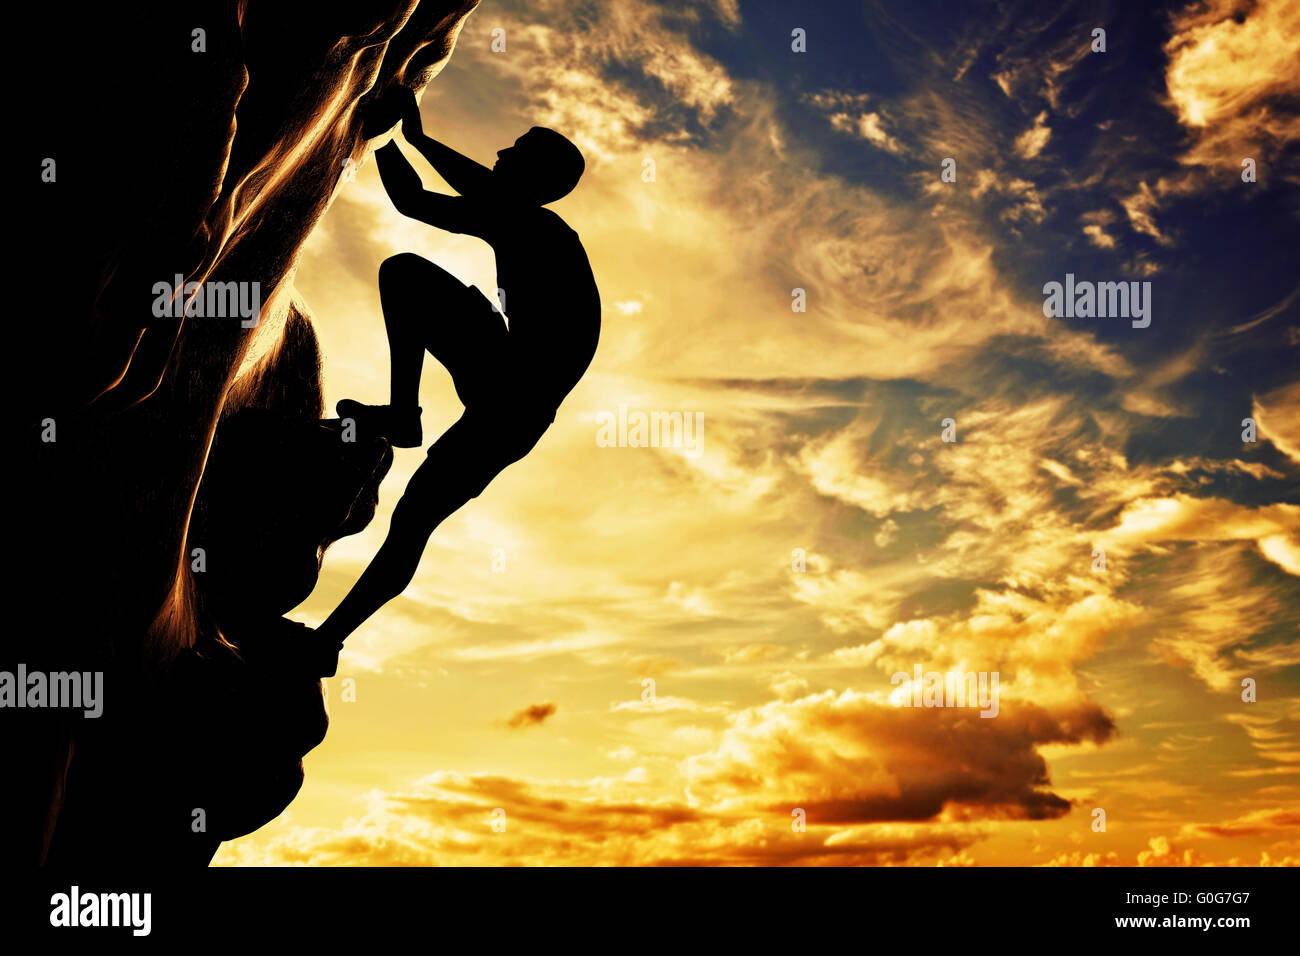 A silhouette of man climbing on rock, mountain at sunset. Adrenaline, strenght, ambition Stock Photo